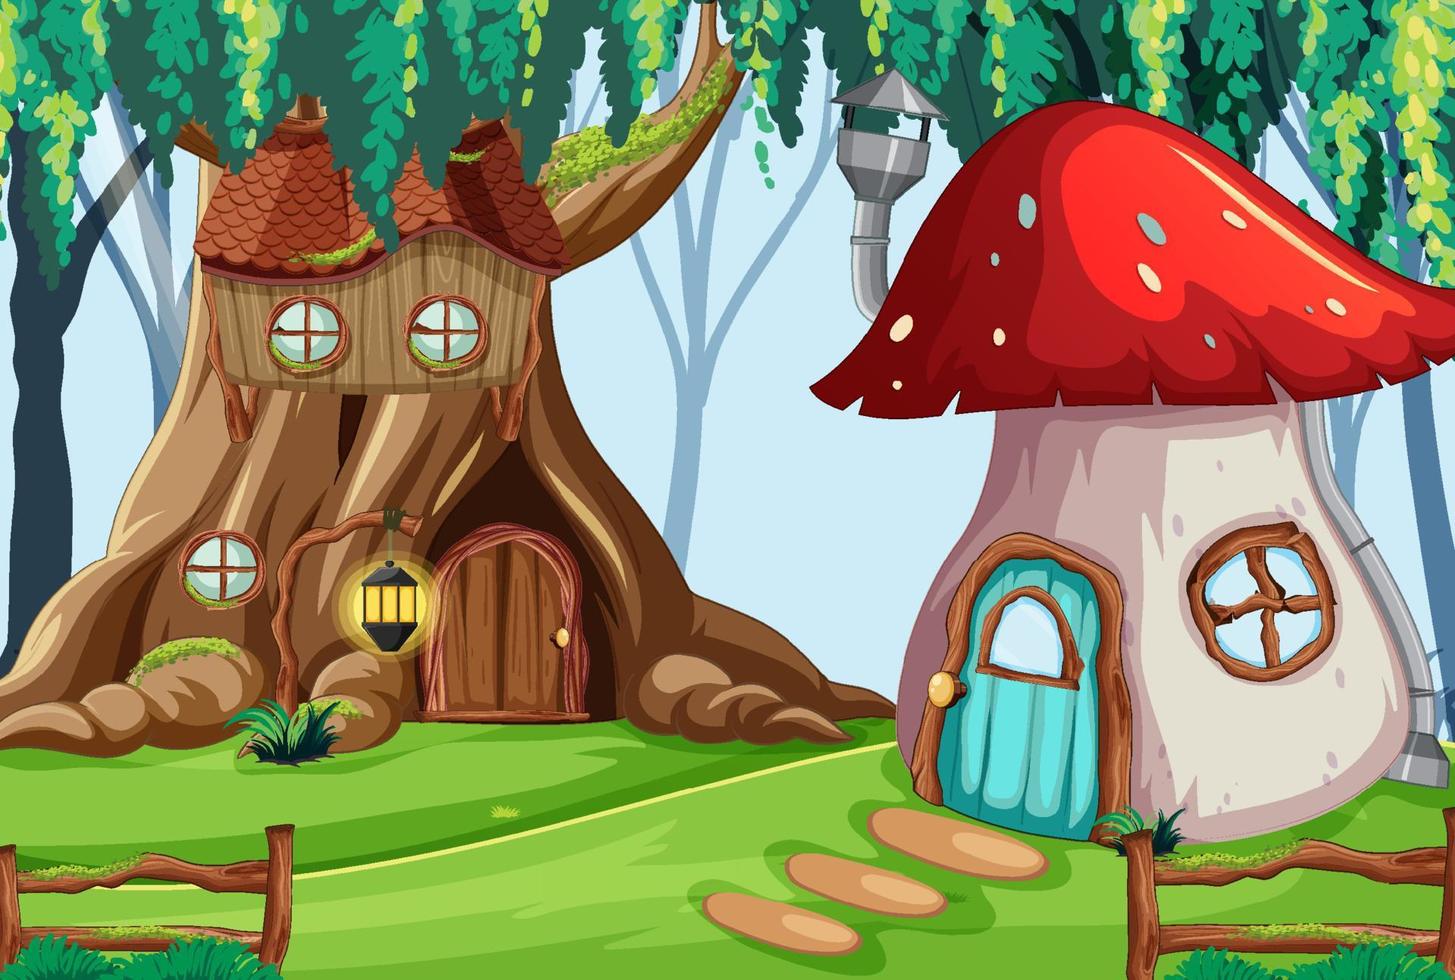 Hollow tree house and mushroom house in enchanted forest vector